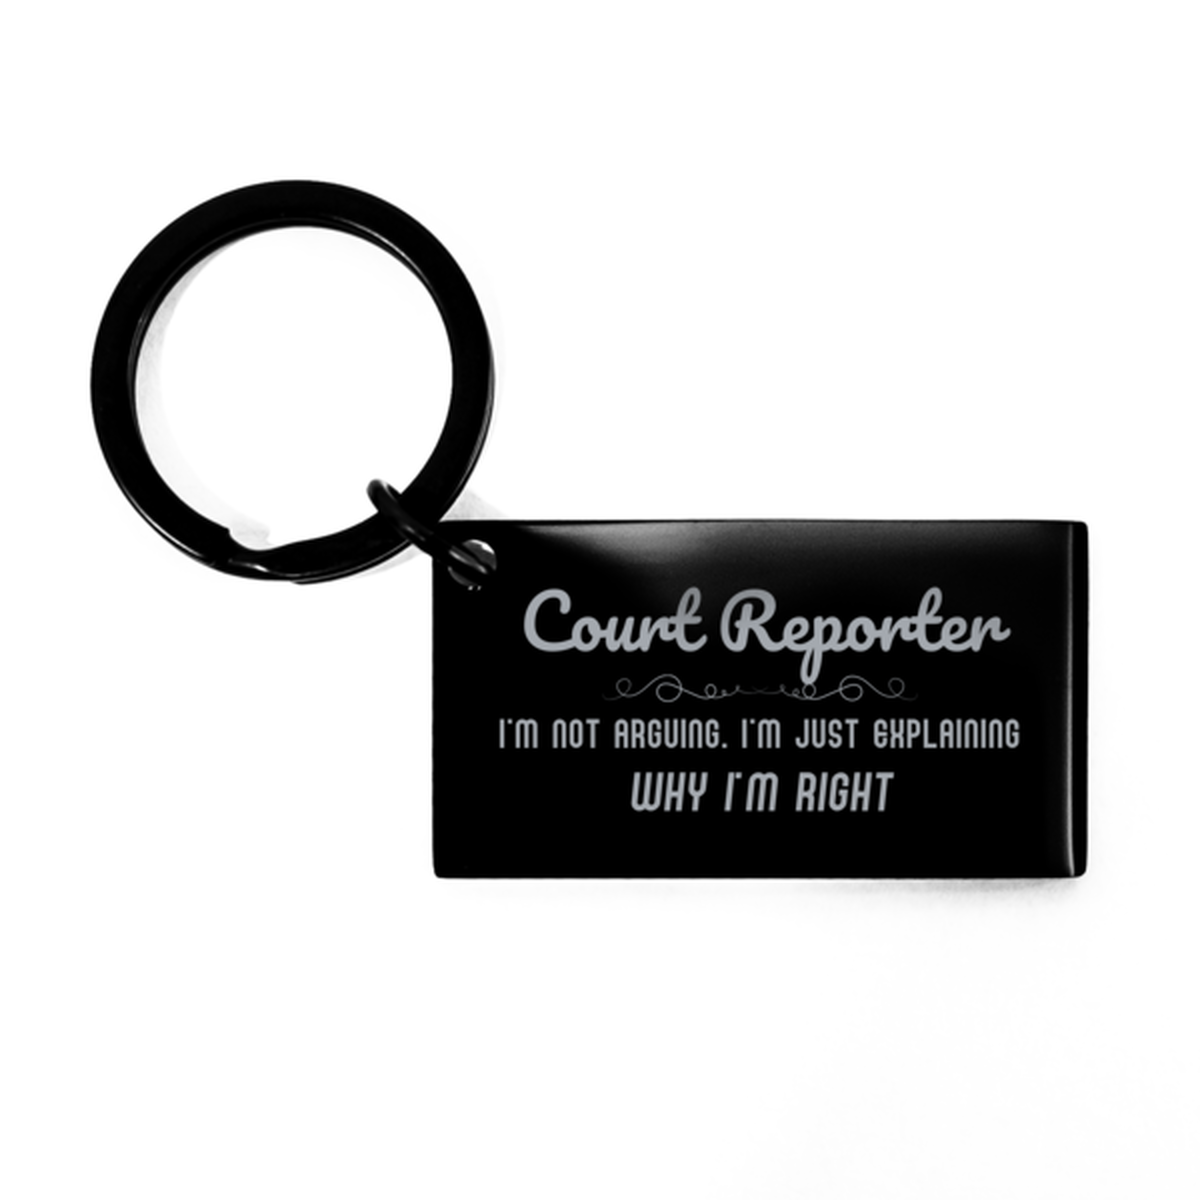 Court Reporter I'm not Arguing. I'm Just Explaining Why I'm RIGHT Keychain, Funny Saying Quote Court Reporter Gifts For Court Reporter Graduation Birthday Christmas Gifts for Men Women Coworker